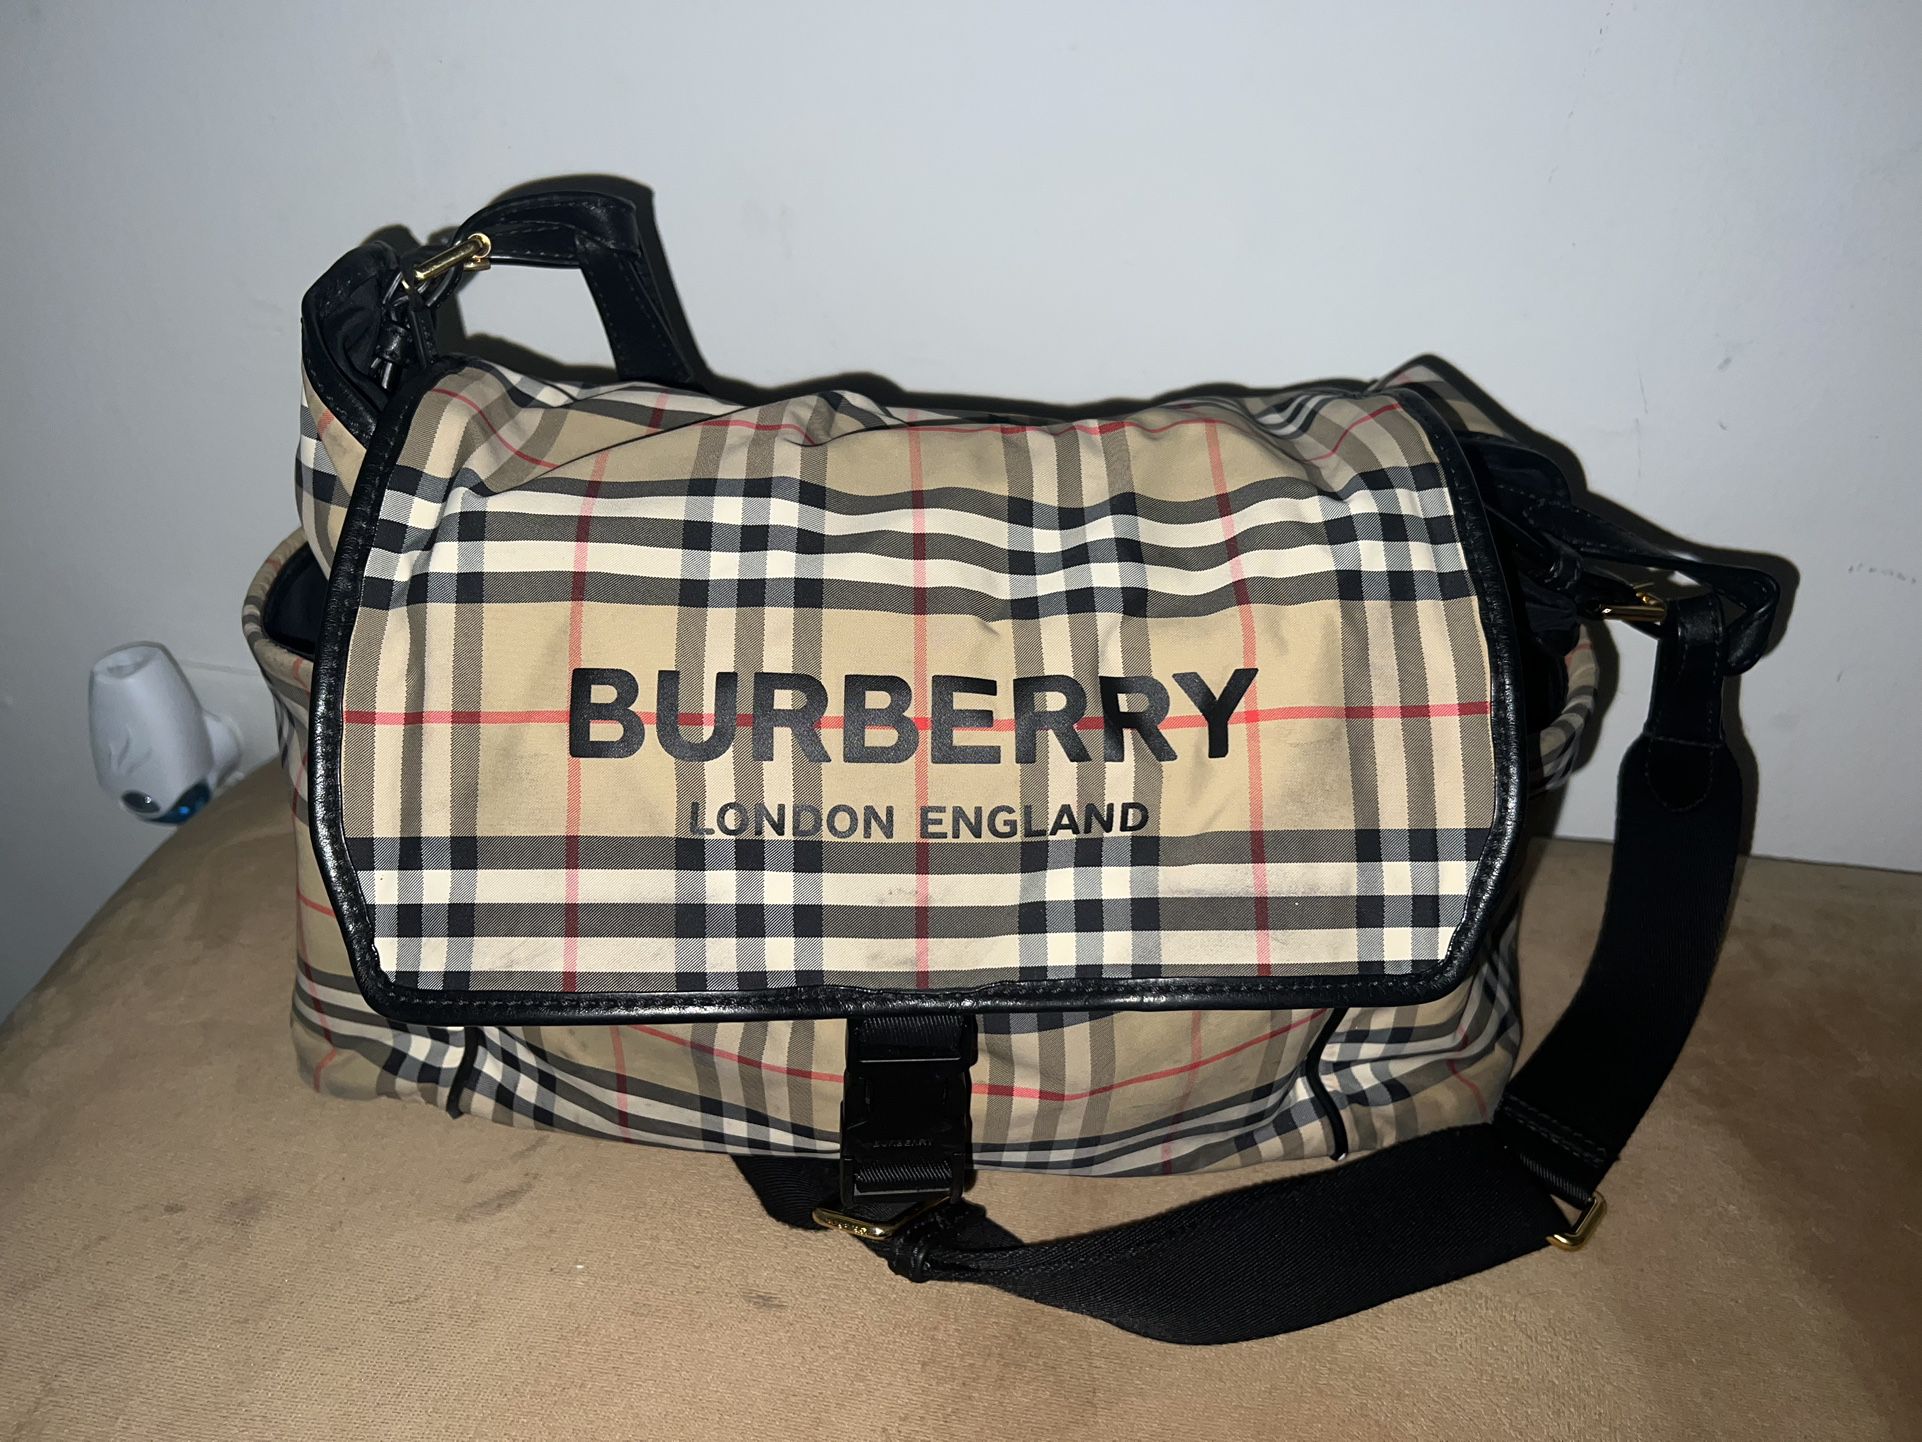 Burberry Kids Vintage Check Baby Changing Bag - Farfetch